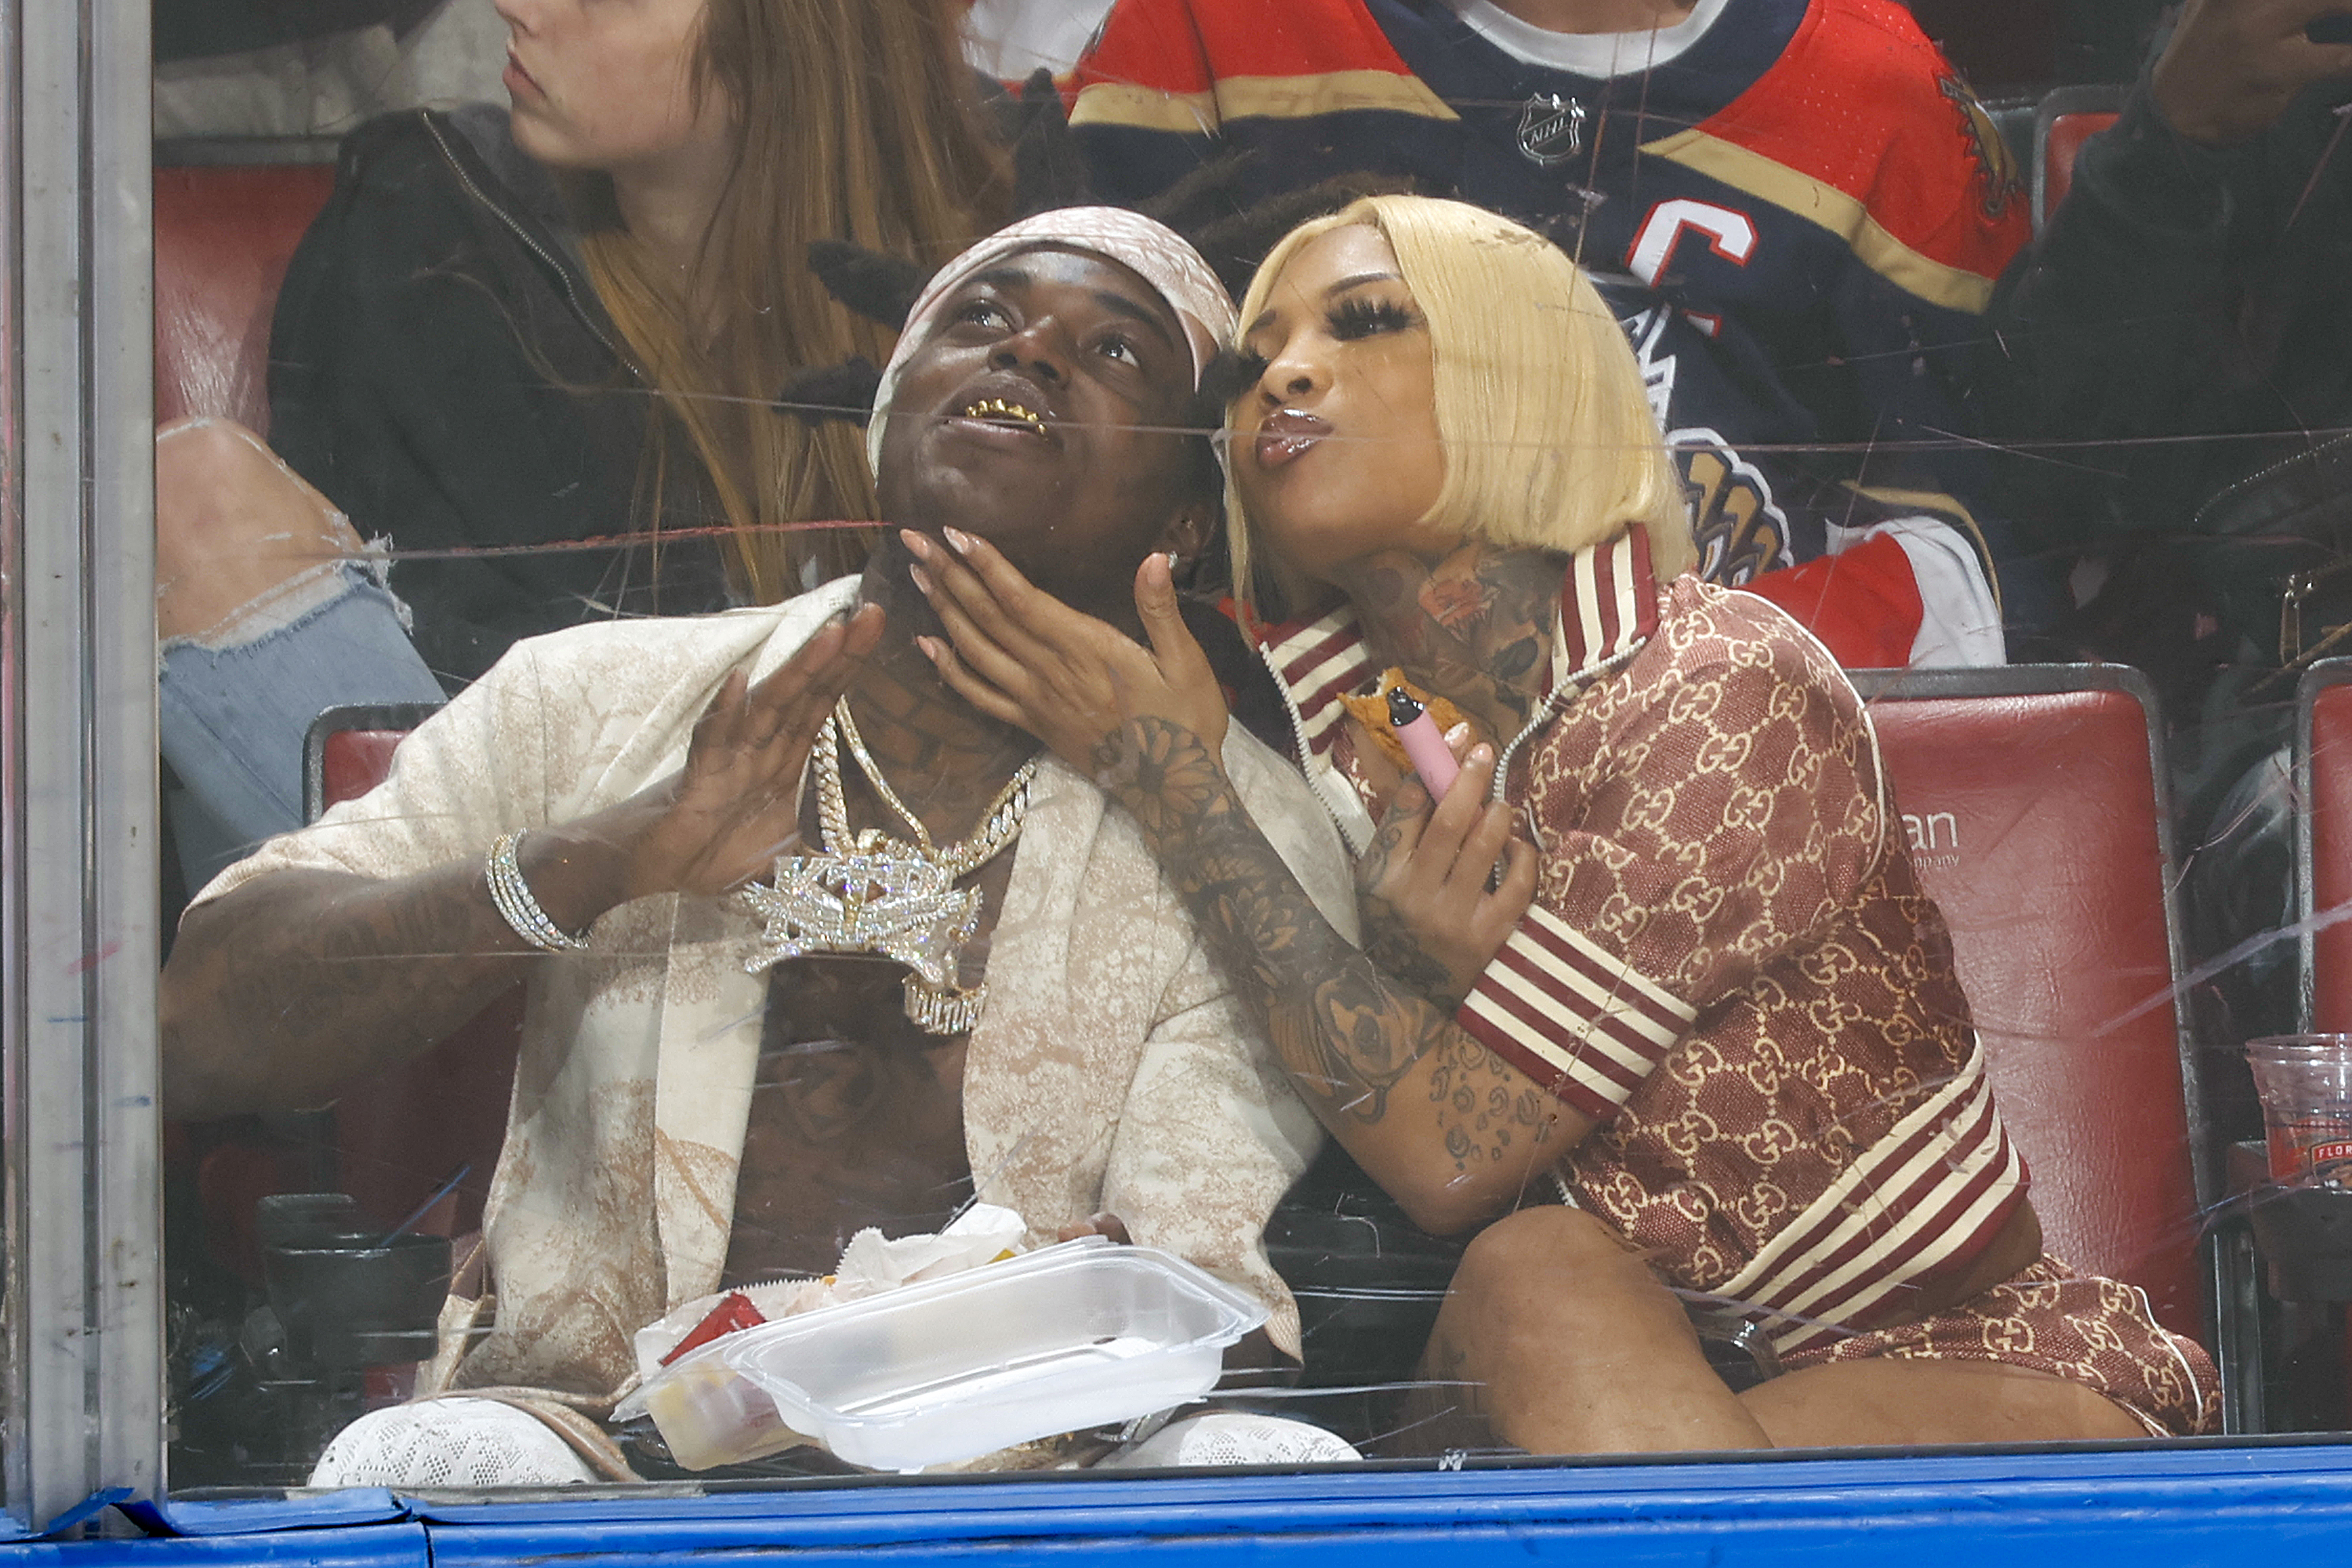 Kodak Black and Mellow Rackz watching an ice hockey game on January 11, 2022, in Sunrise, Florida. | Source: Getty Images